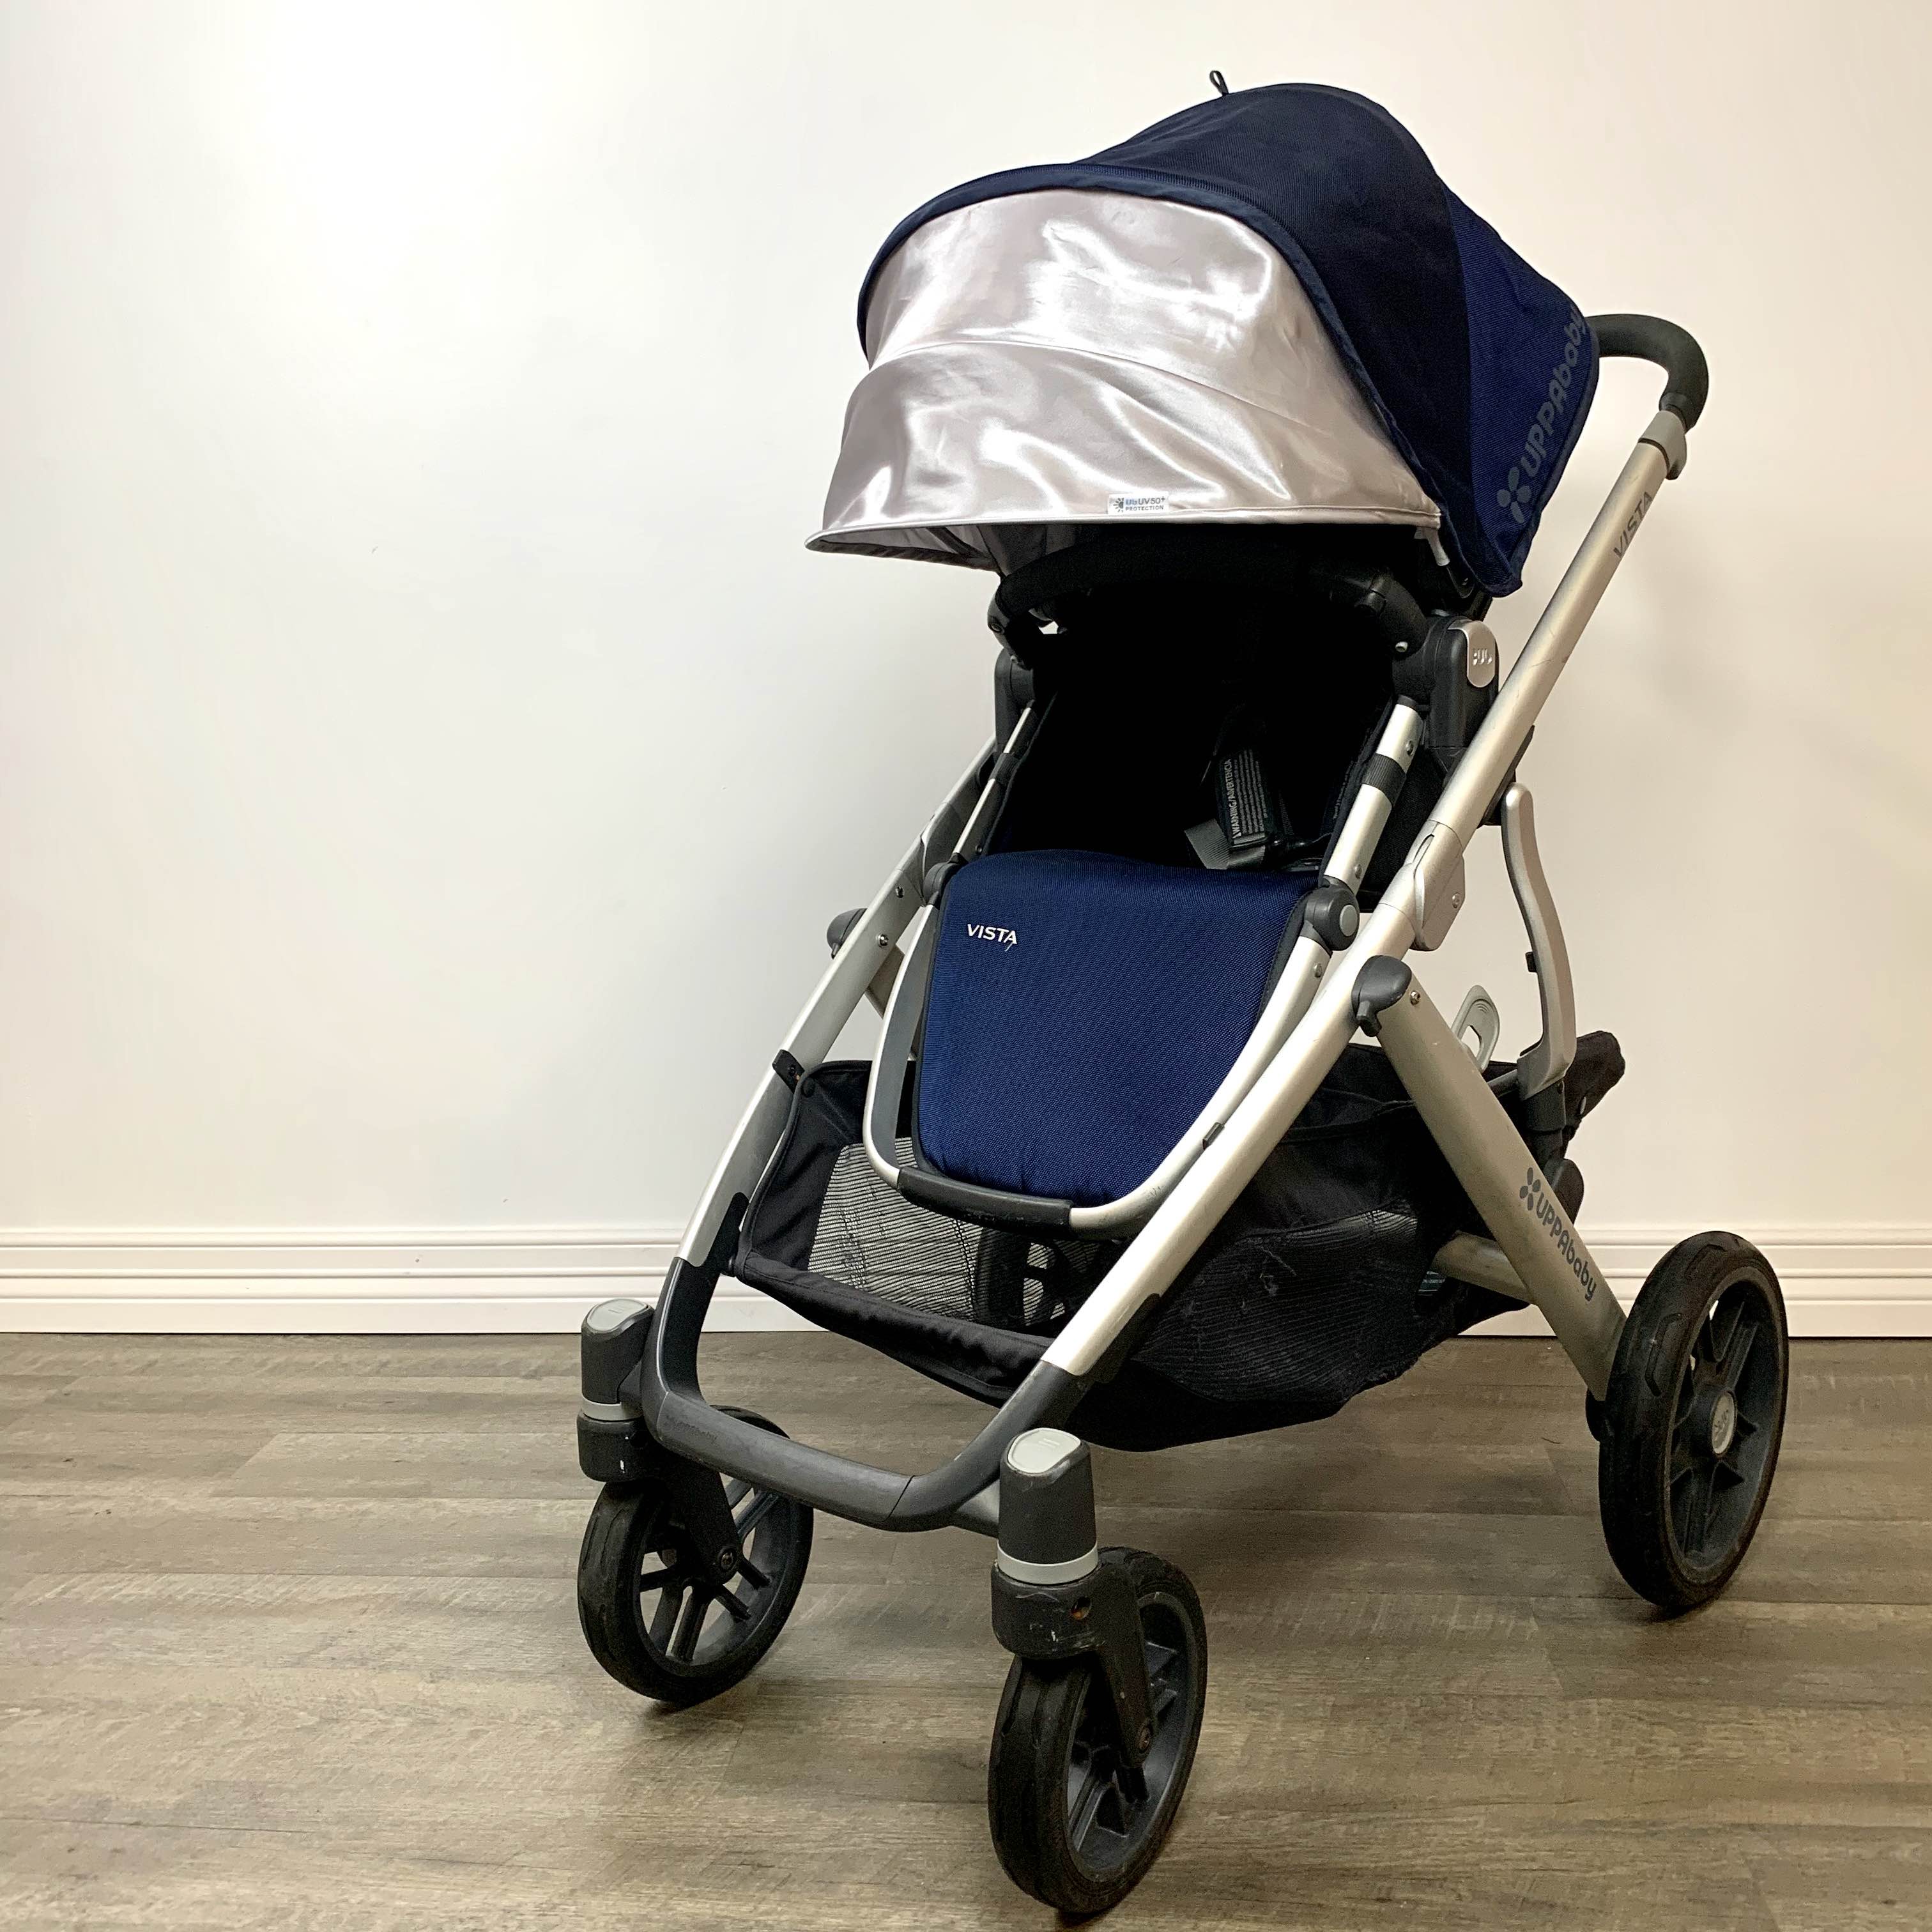 uppababy used